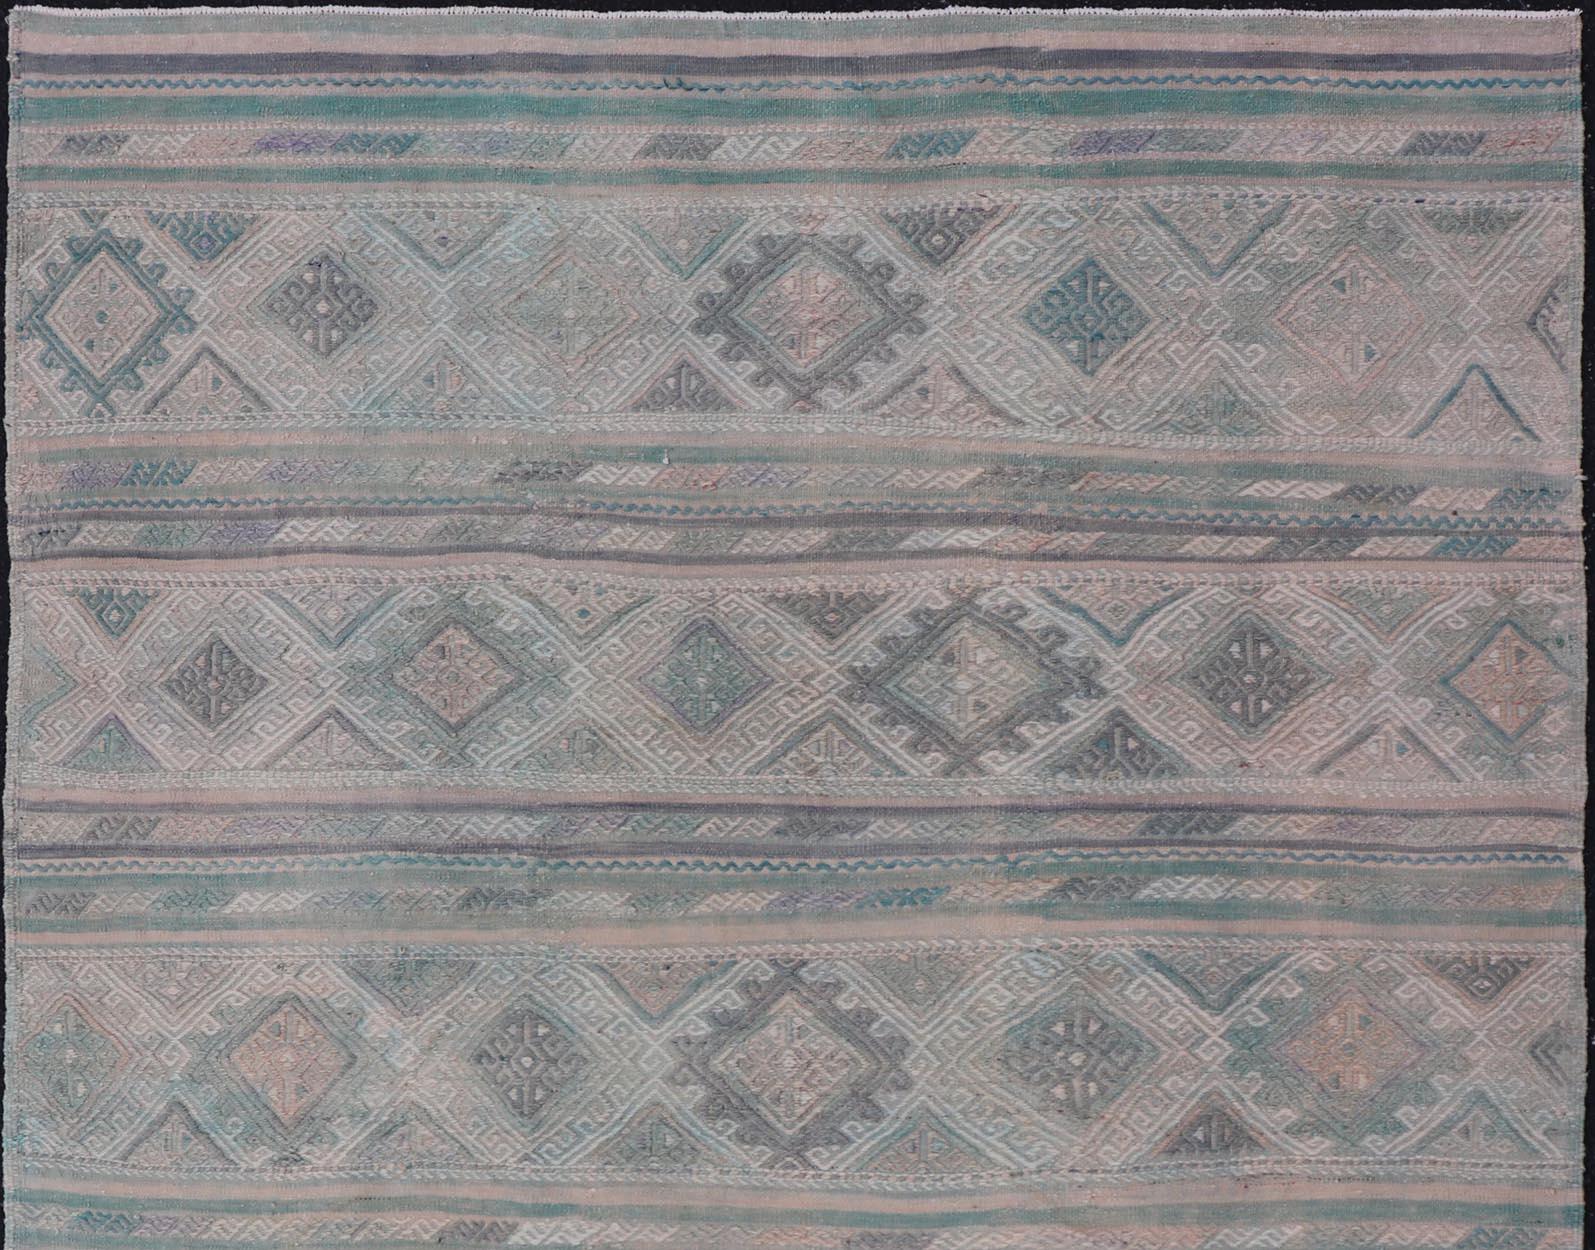 Hand-Woven Turkish Vintage Kilim Flat-Weave with Embroideries Kilim in Pastel Color For Sale